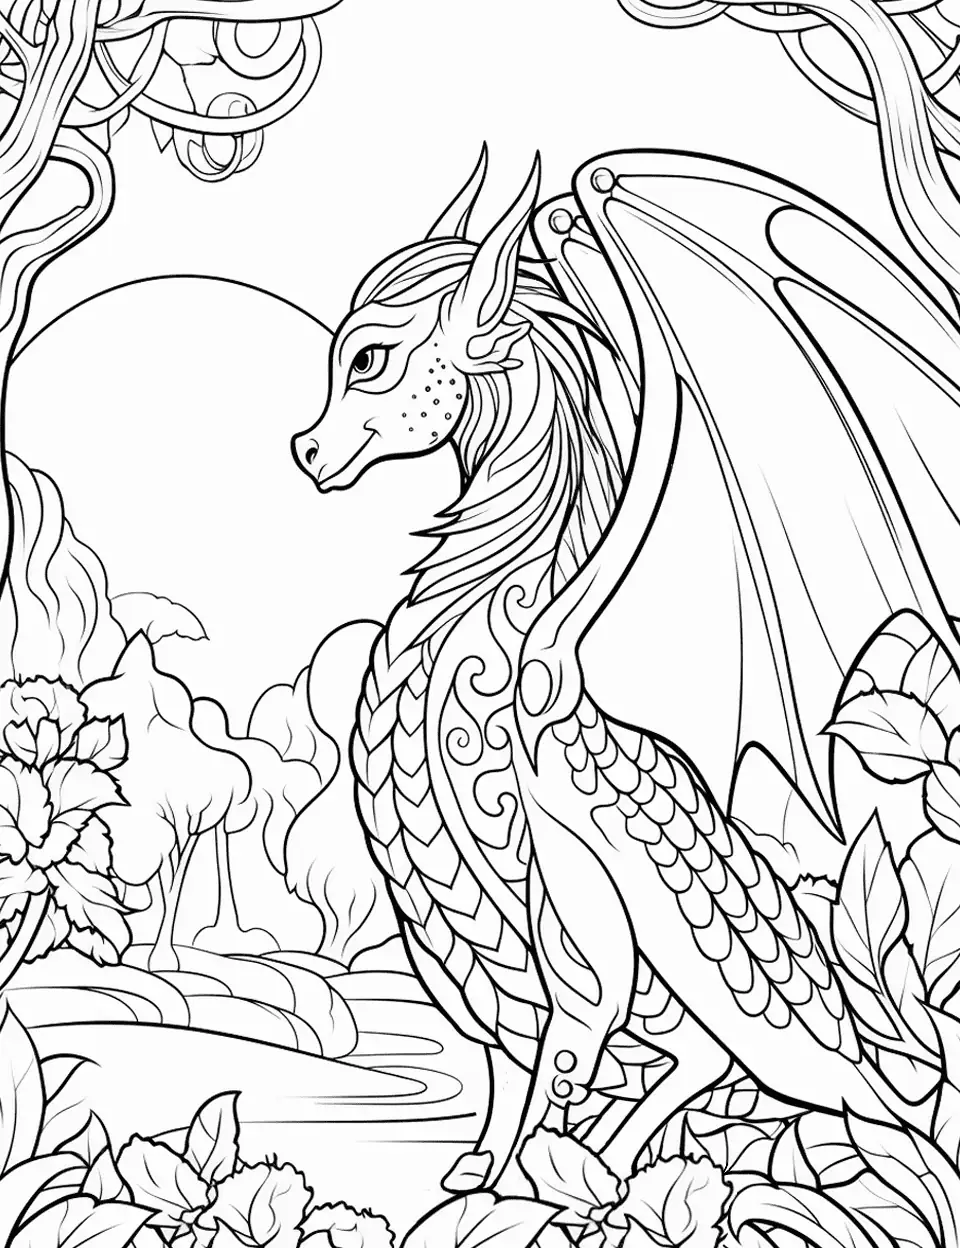 Dragon's Mystical Forest Adult Coloring Page - A detailed scene of a dragon exploring a mystical forest.